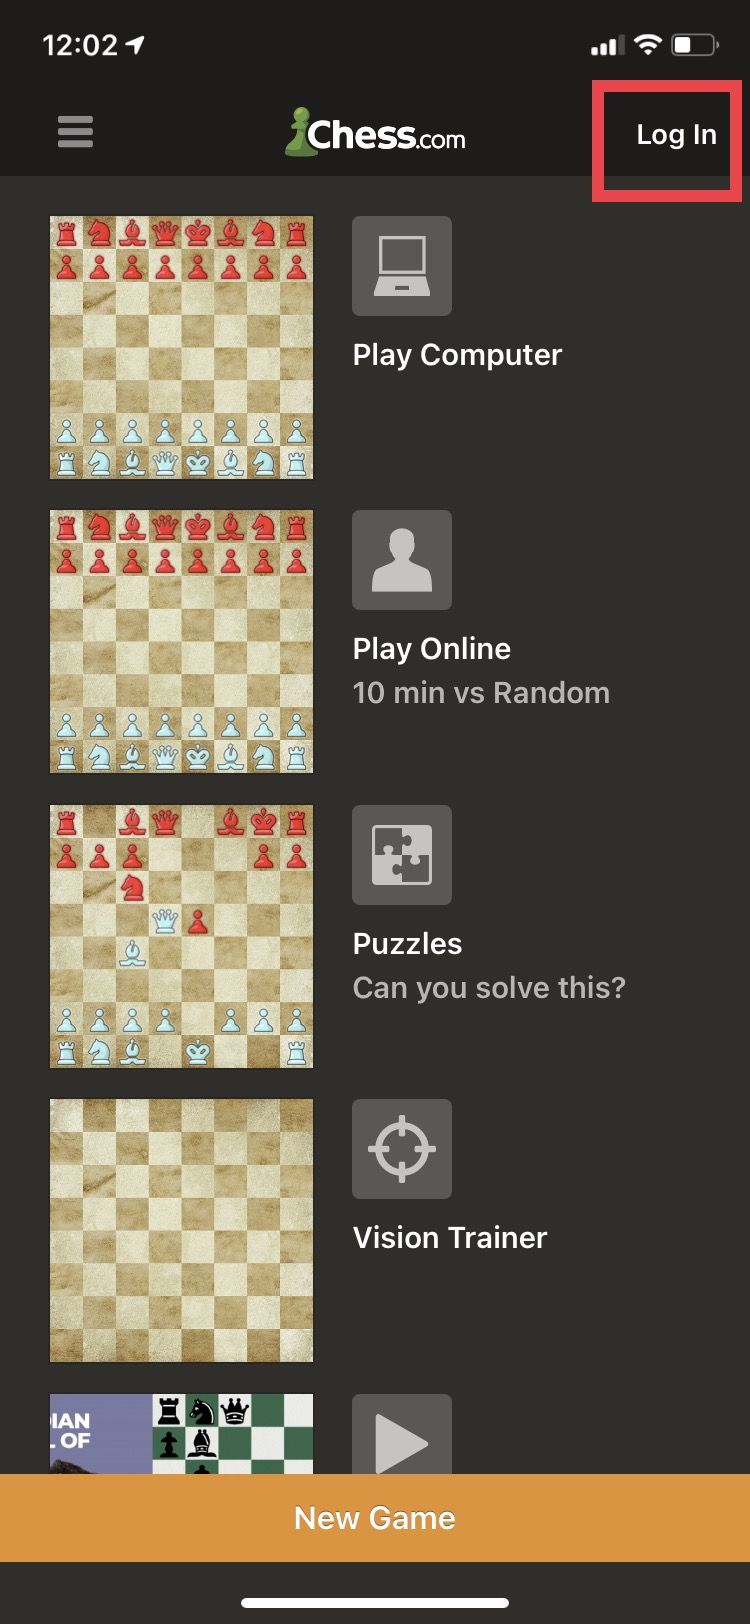 Cannot log in phone app - Chess Forums 